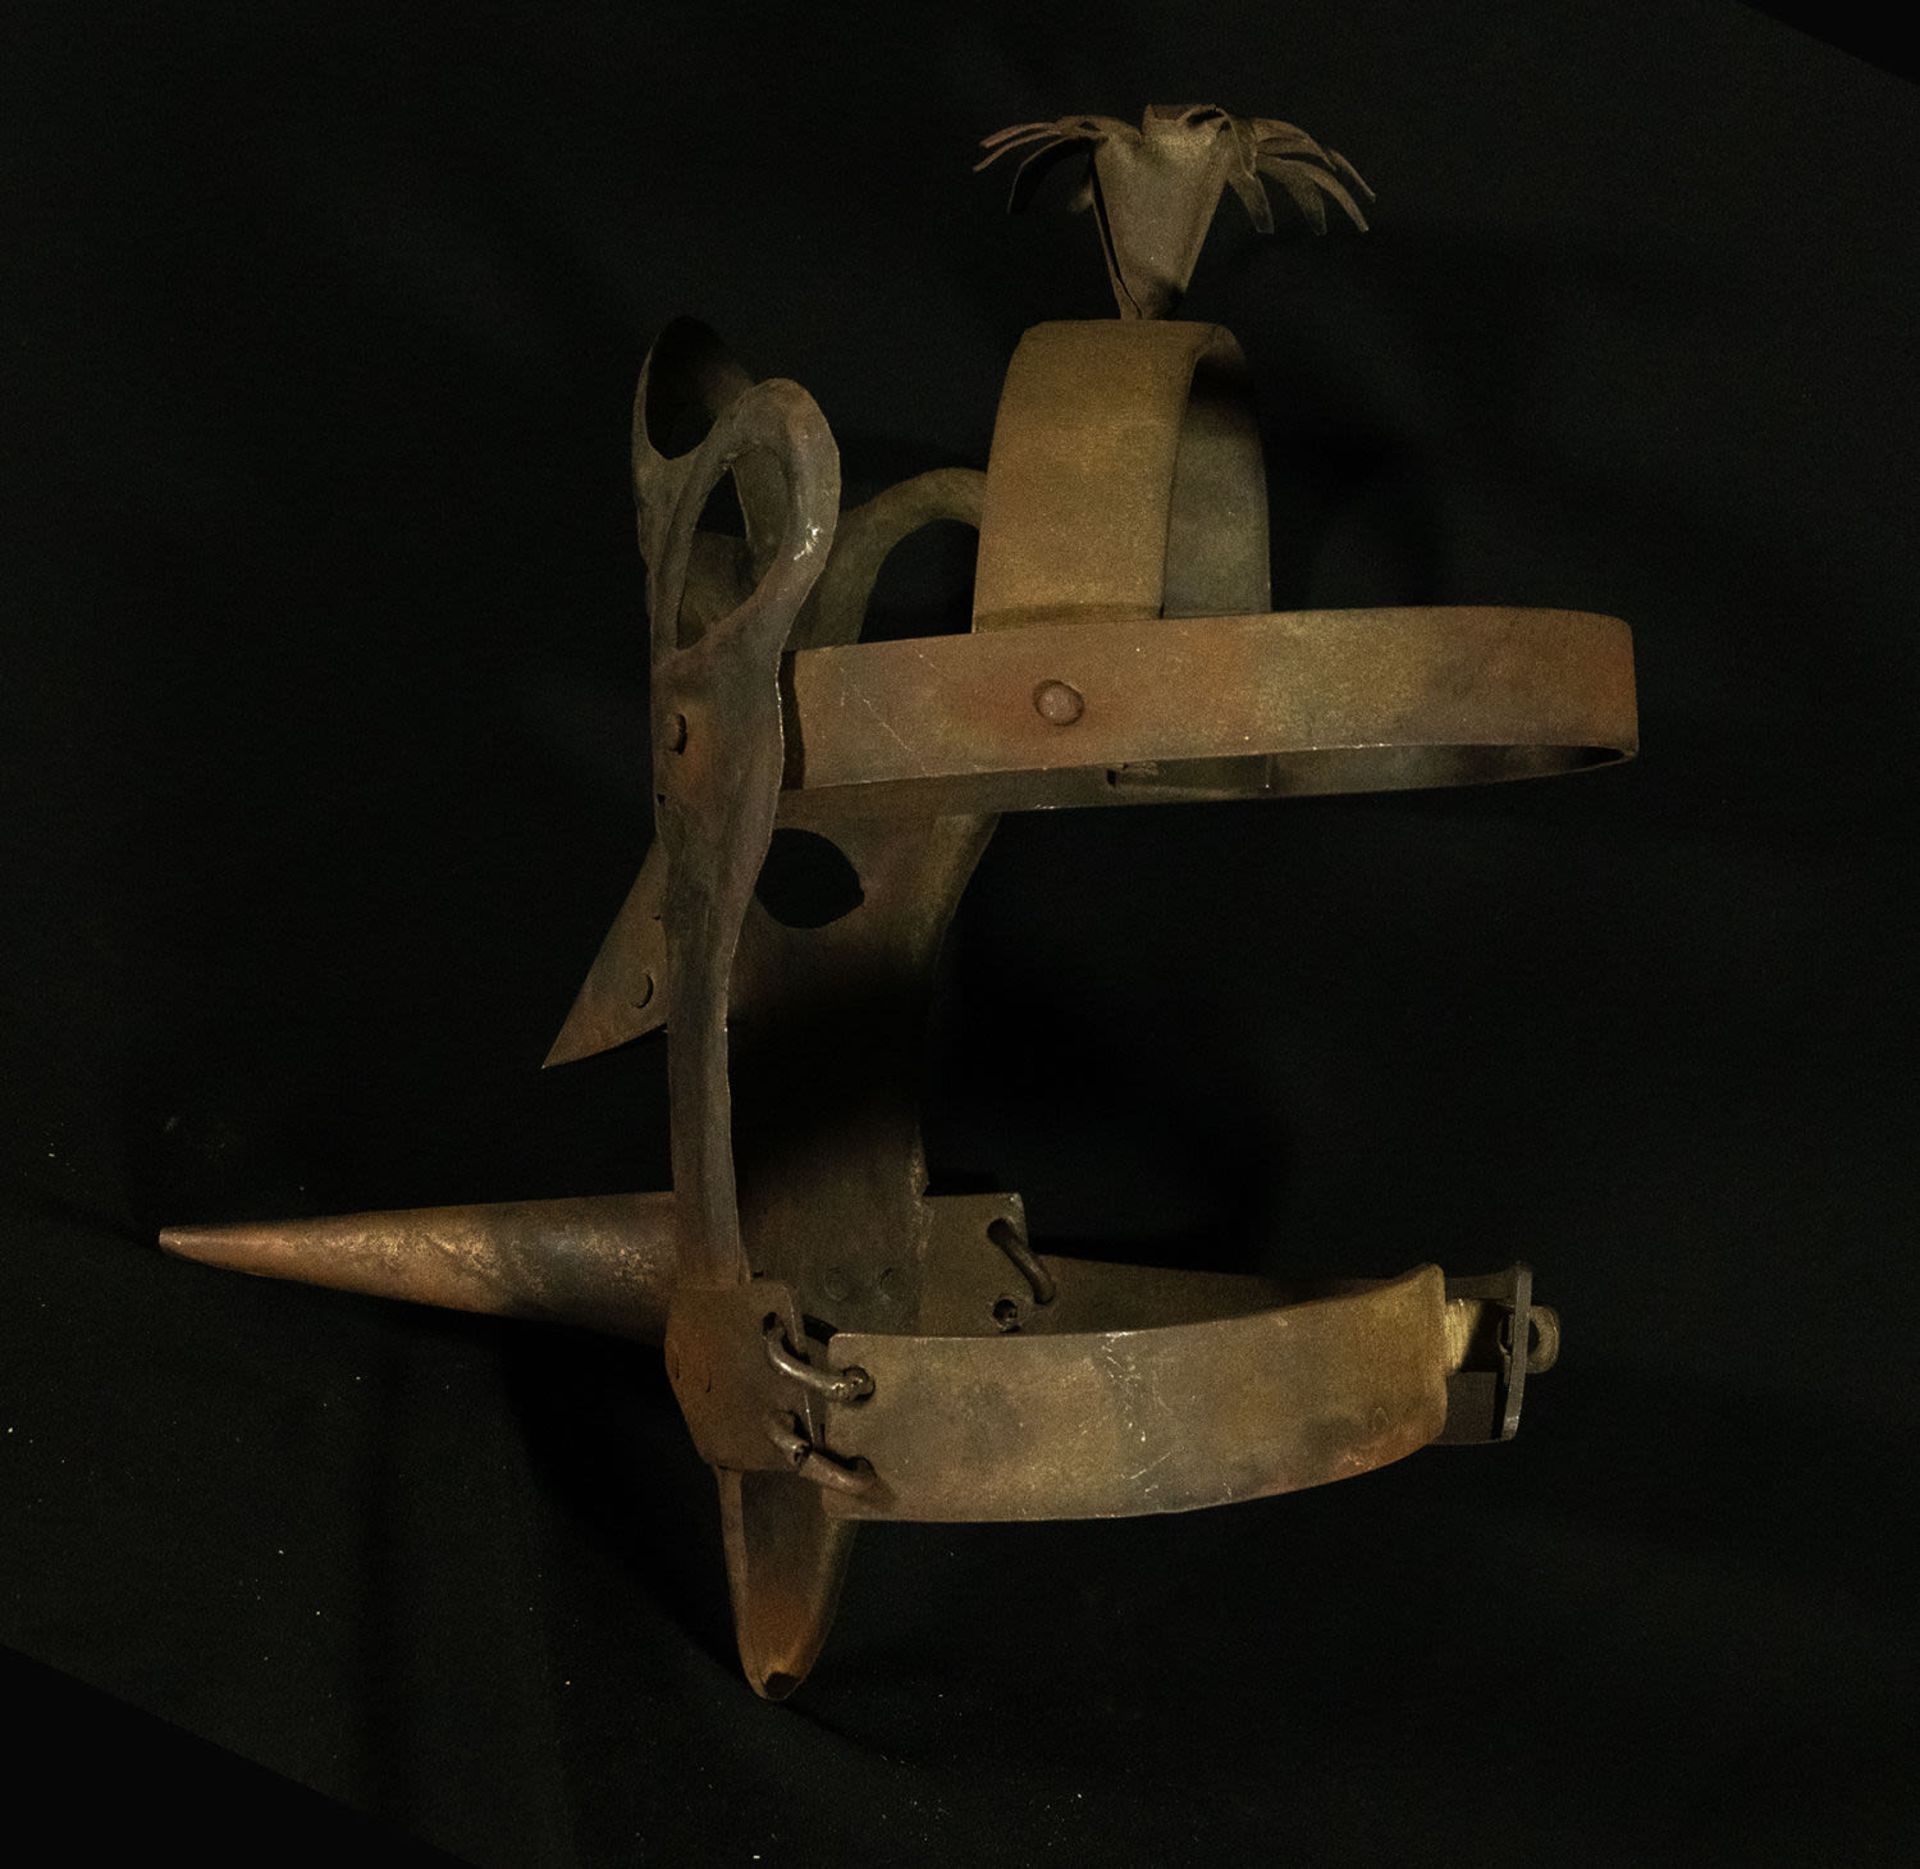 Model reproduction of a German shame mask, following models of the 17th century, 20th century - Image 3 of 3